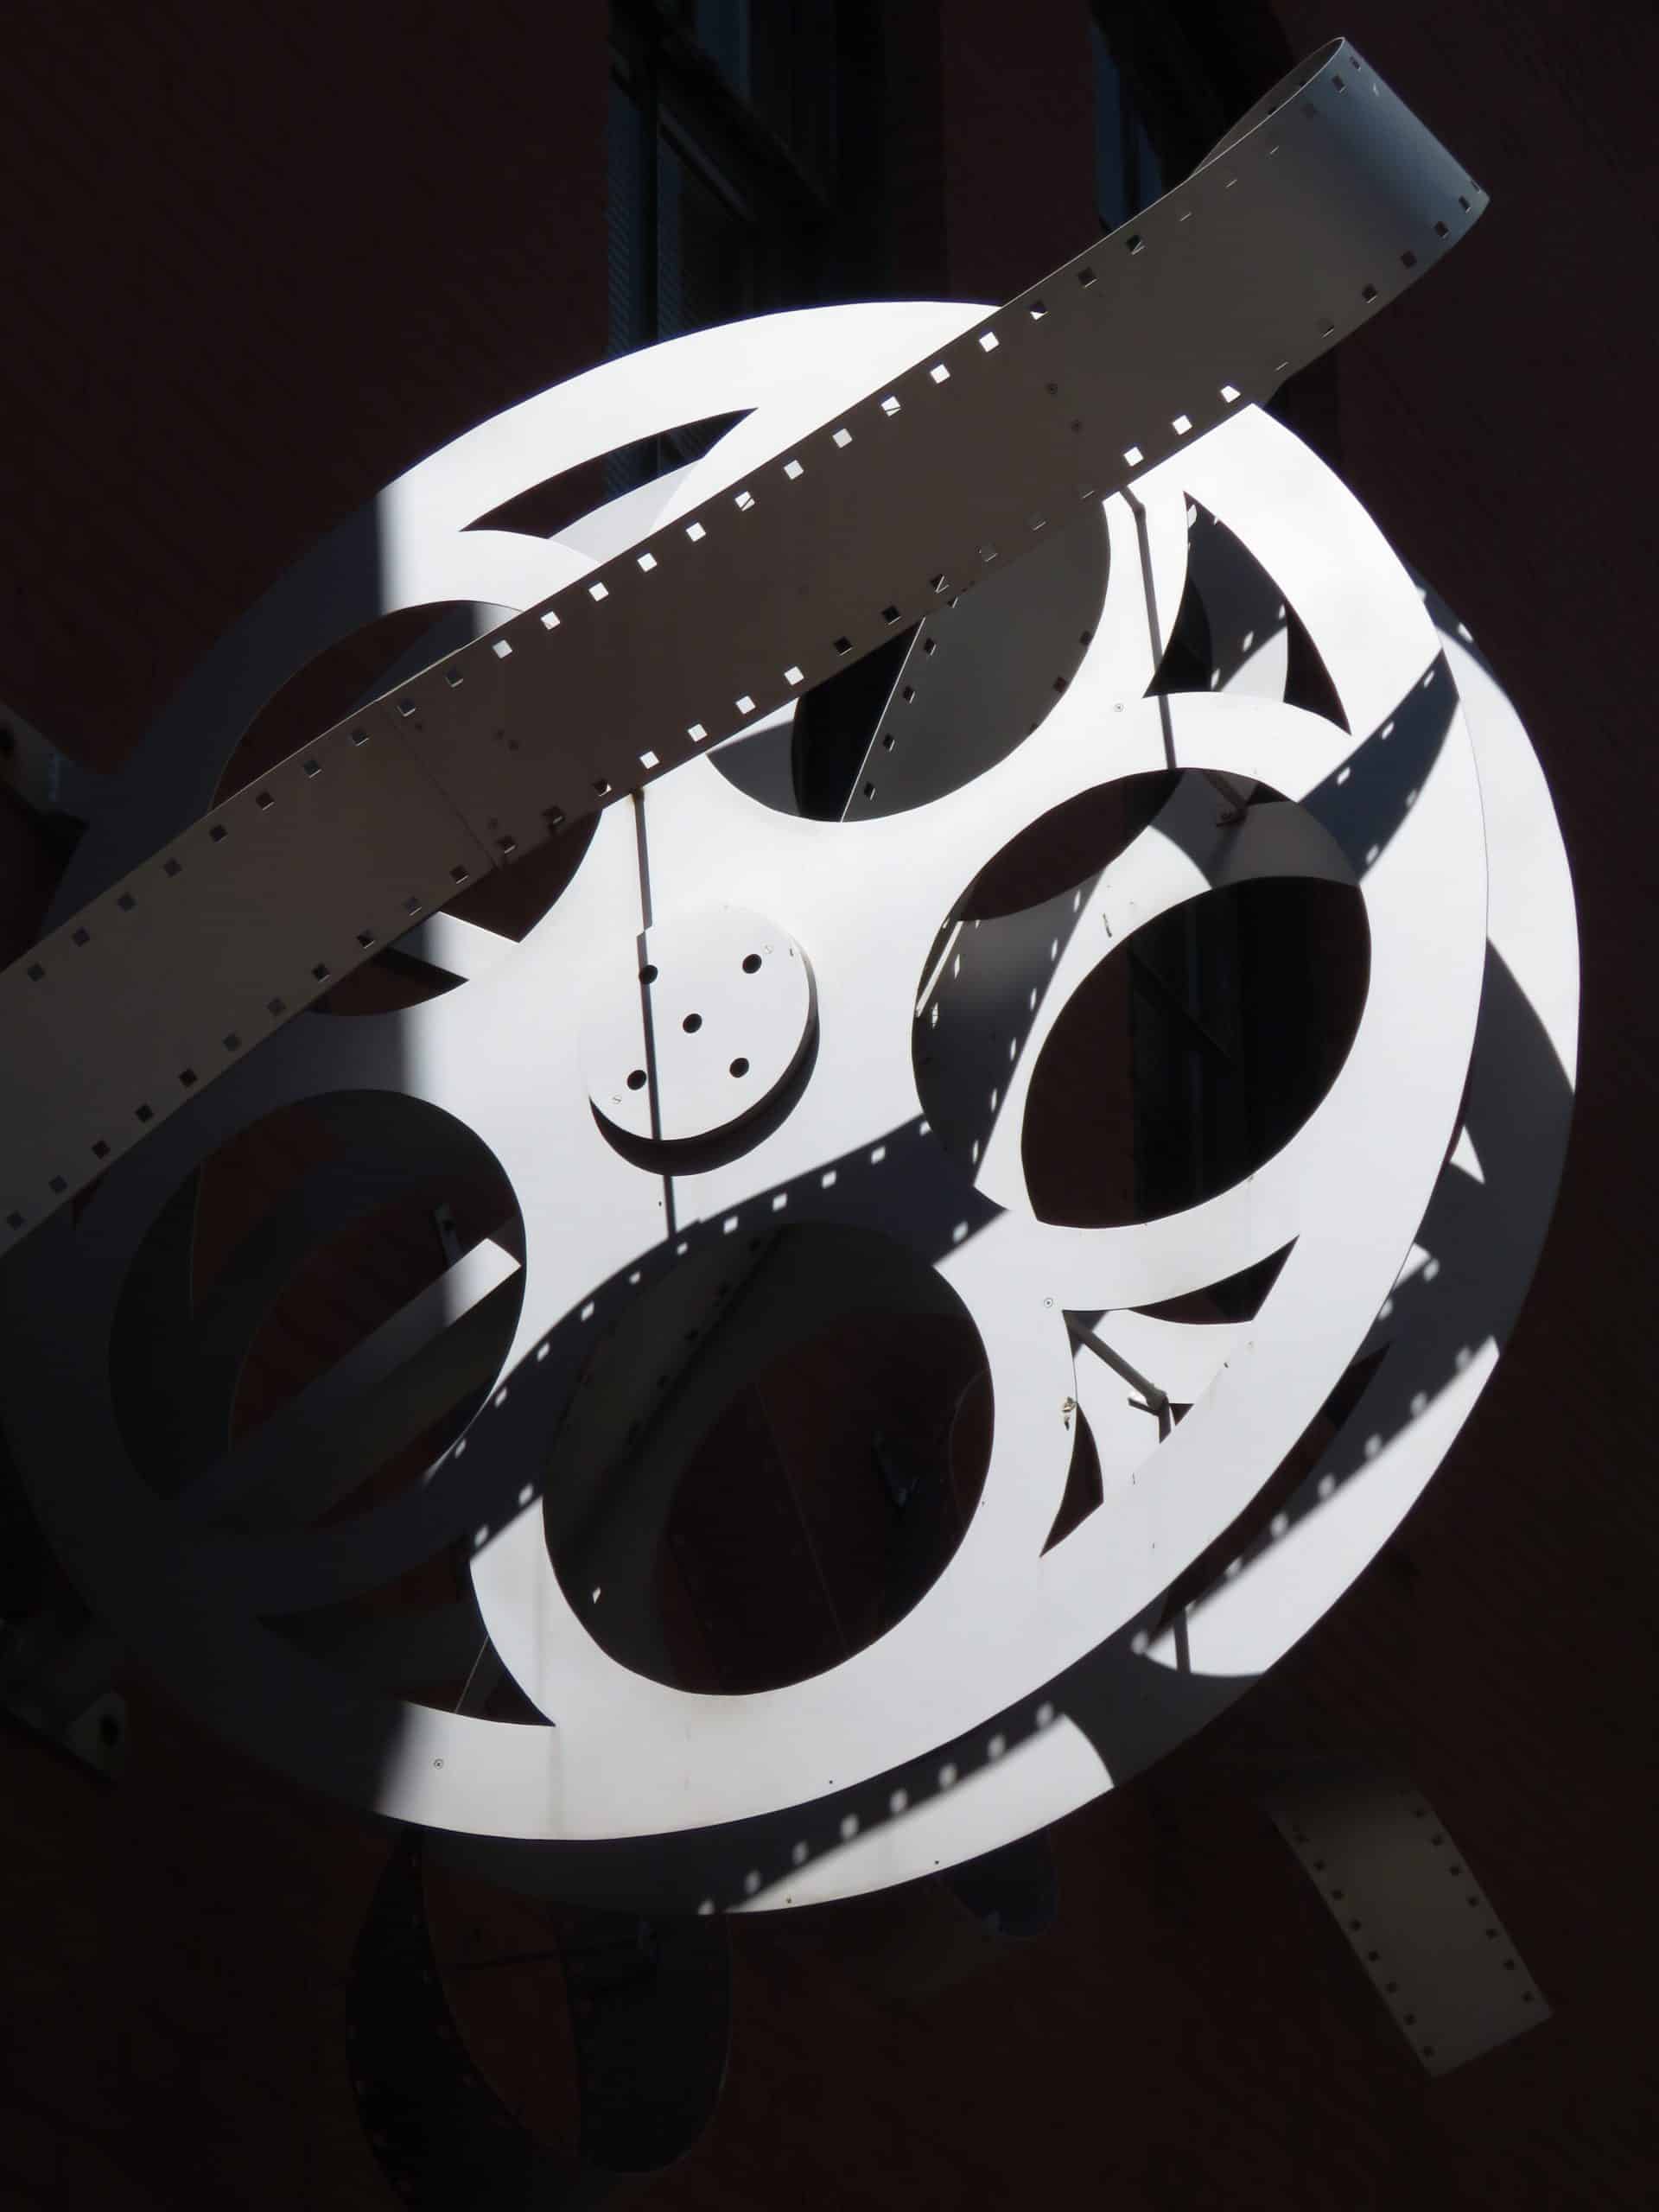 A black and white film reel